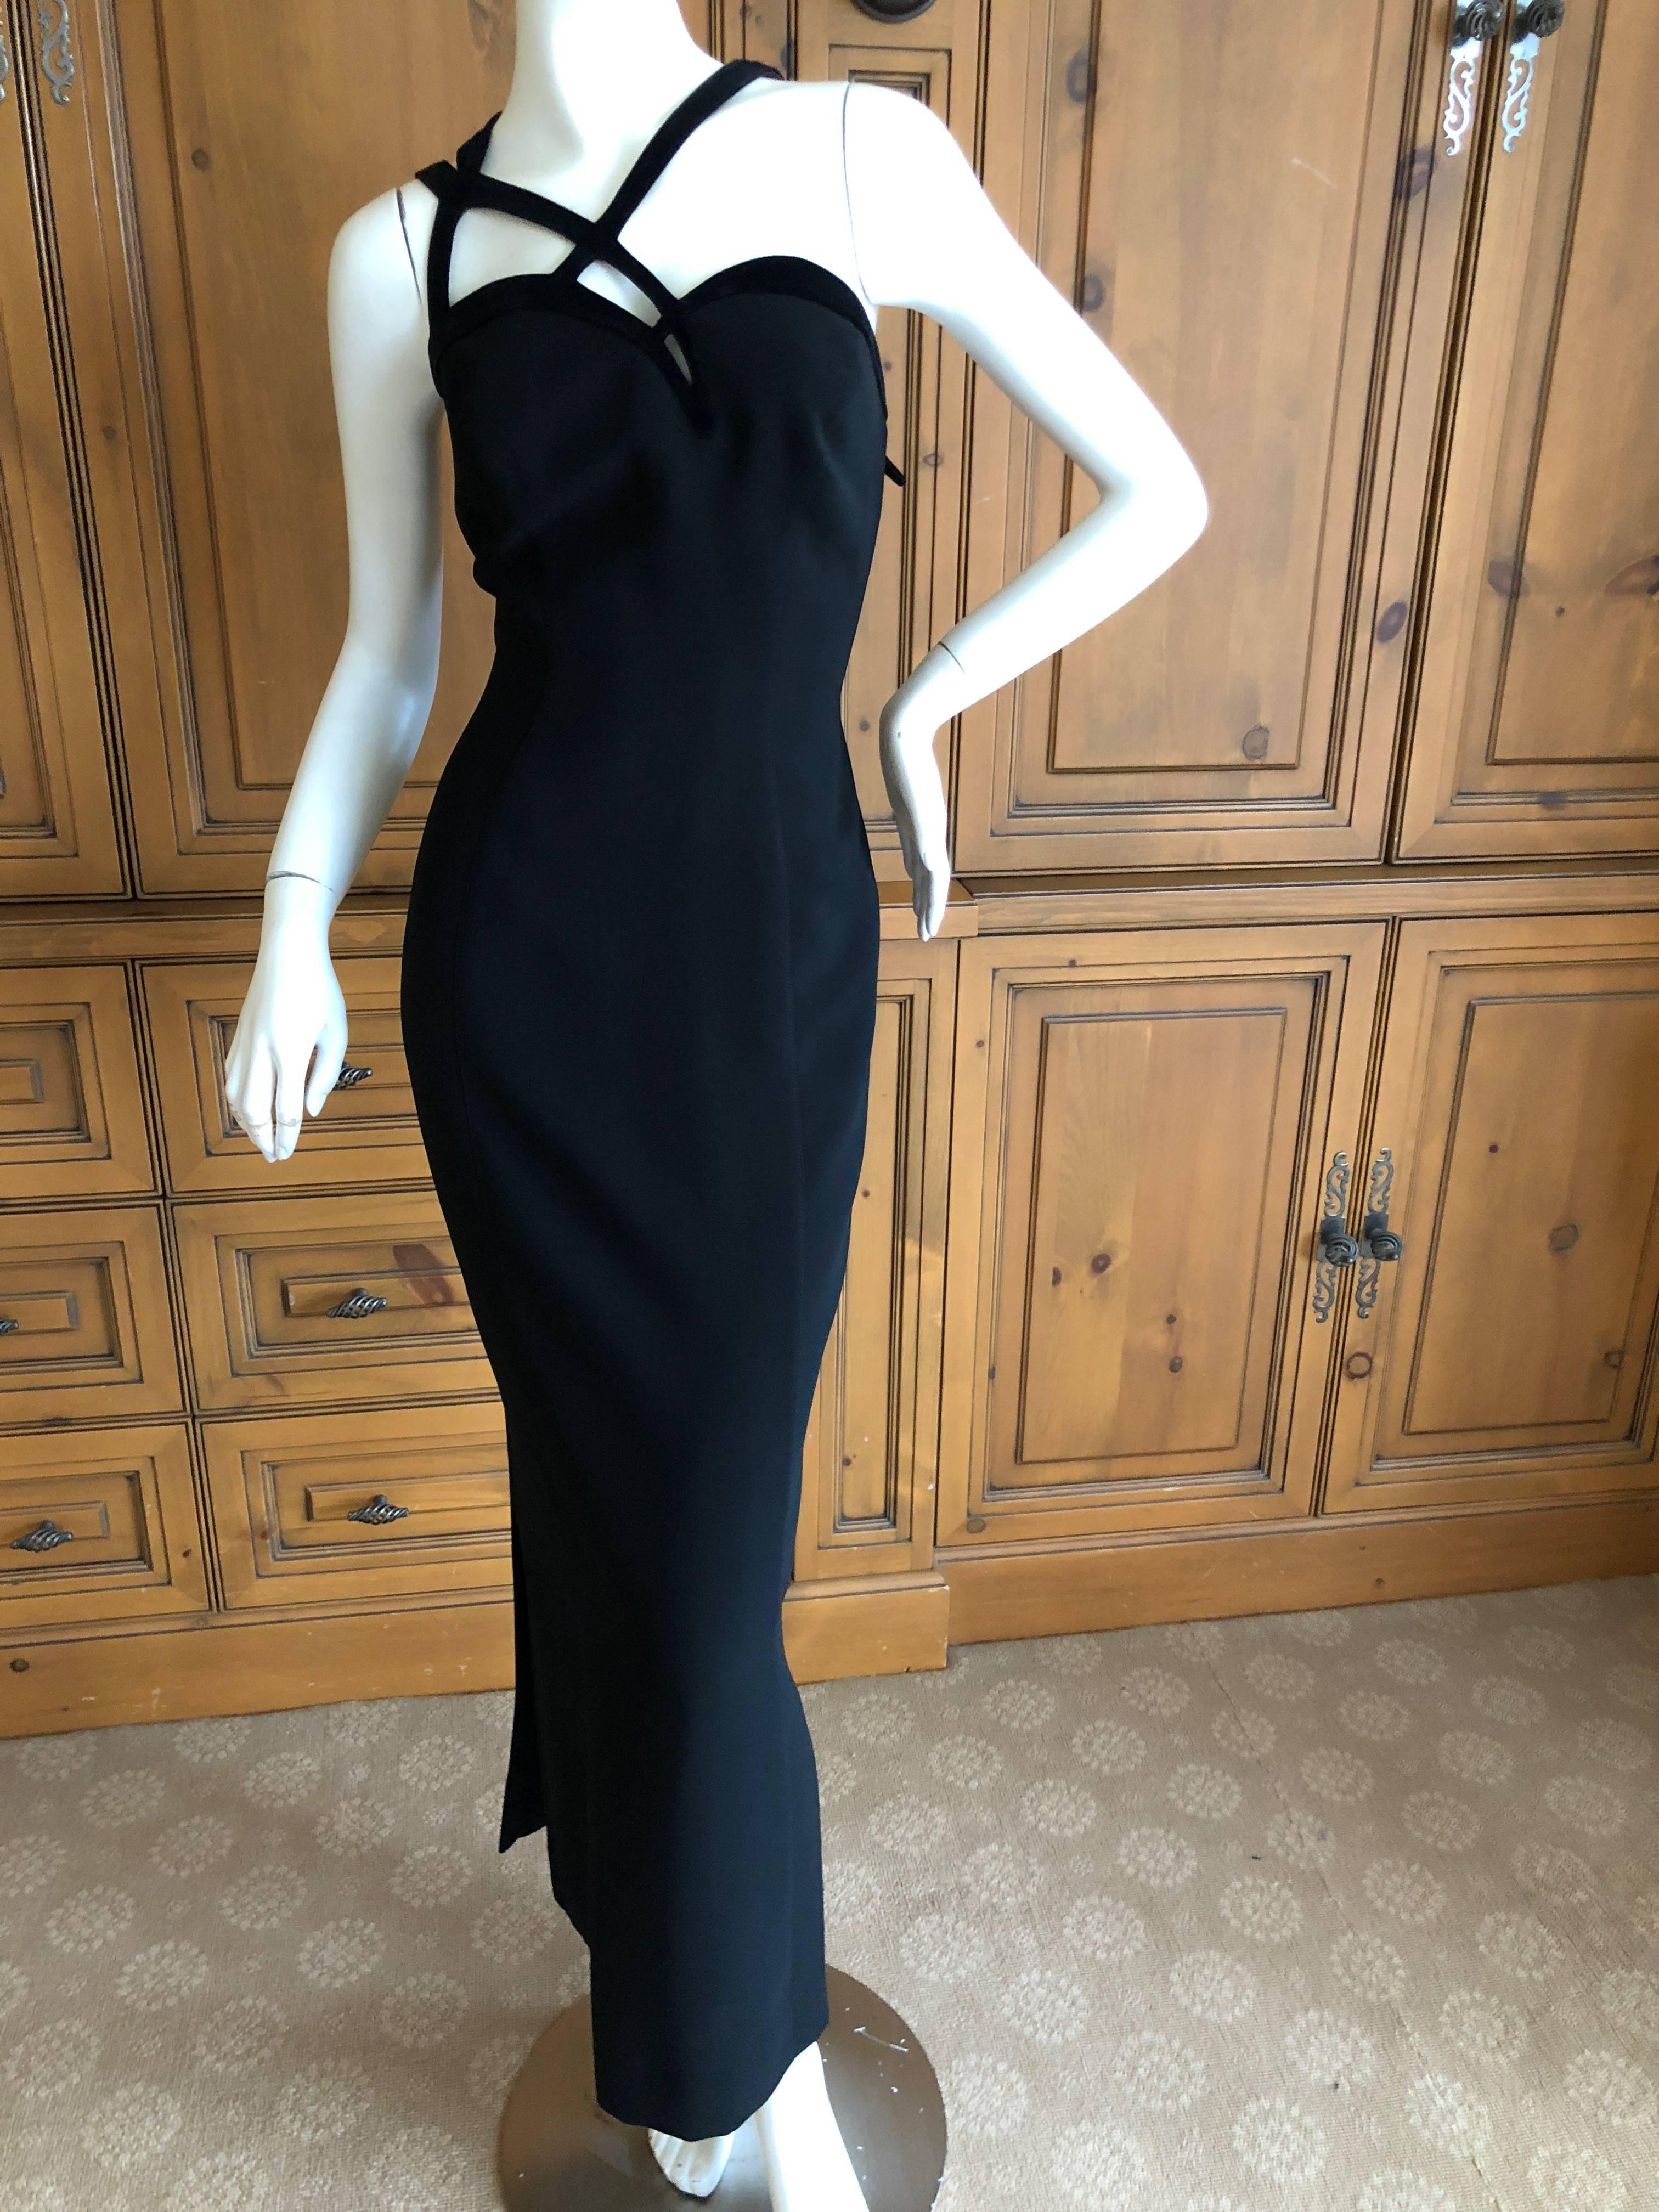 Beautiful black evening dress with velvet trim from Thierry Mugler.
Classic Mugler in a hard to find real size.
Size 44
Bust 36